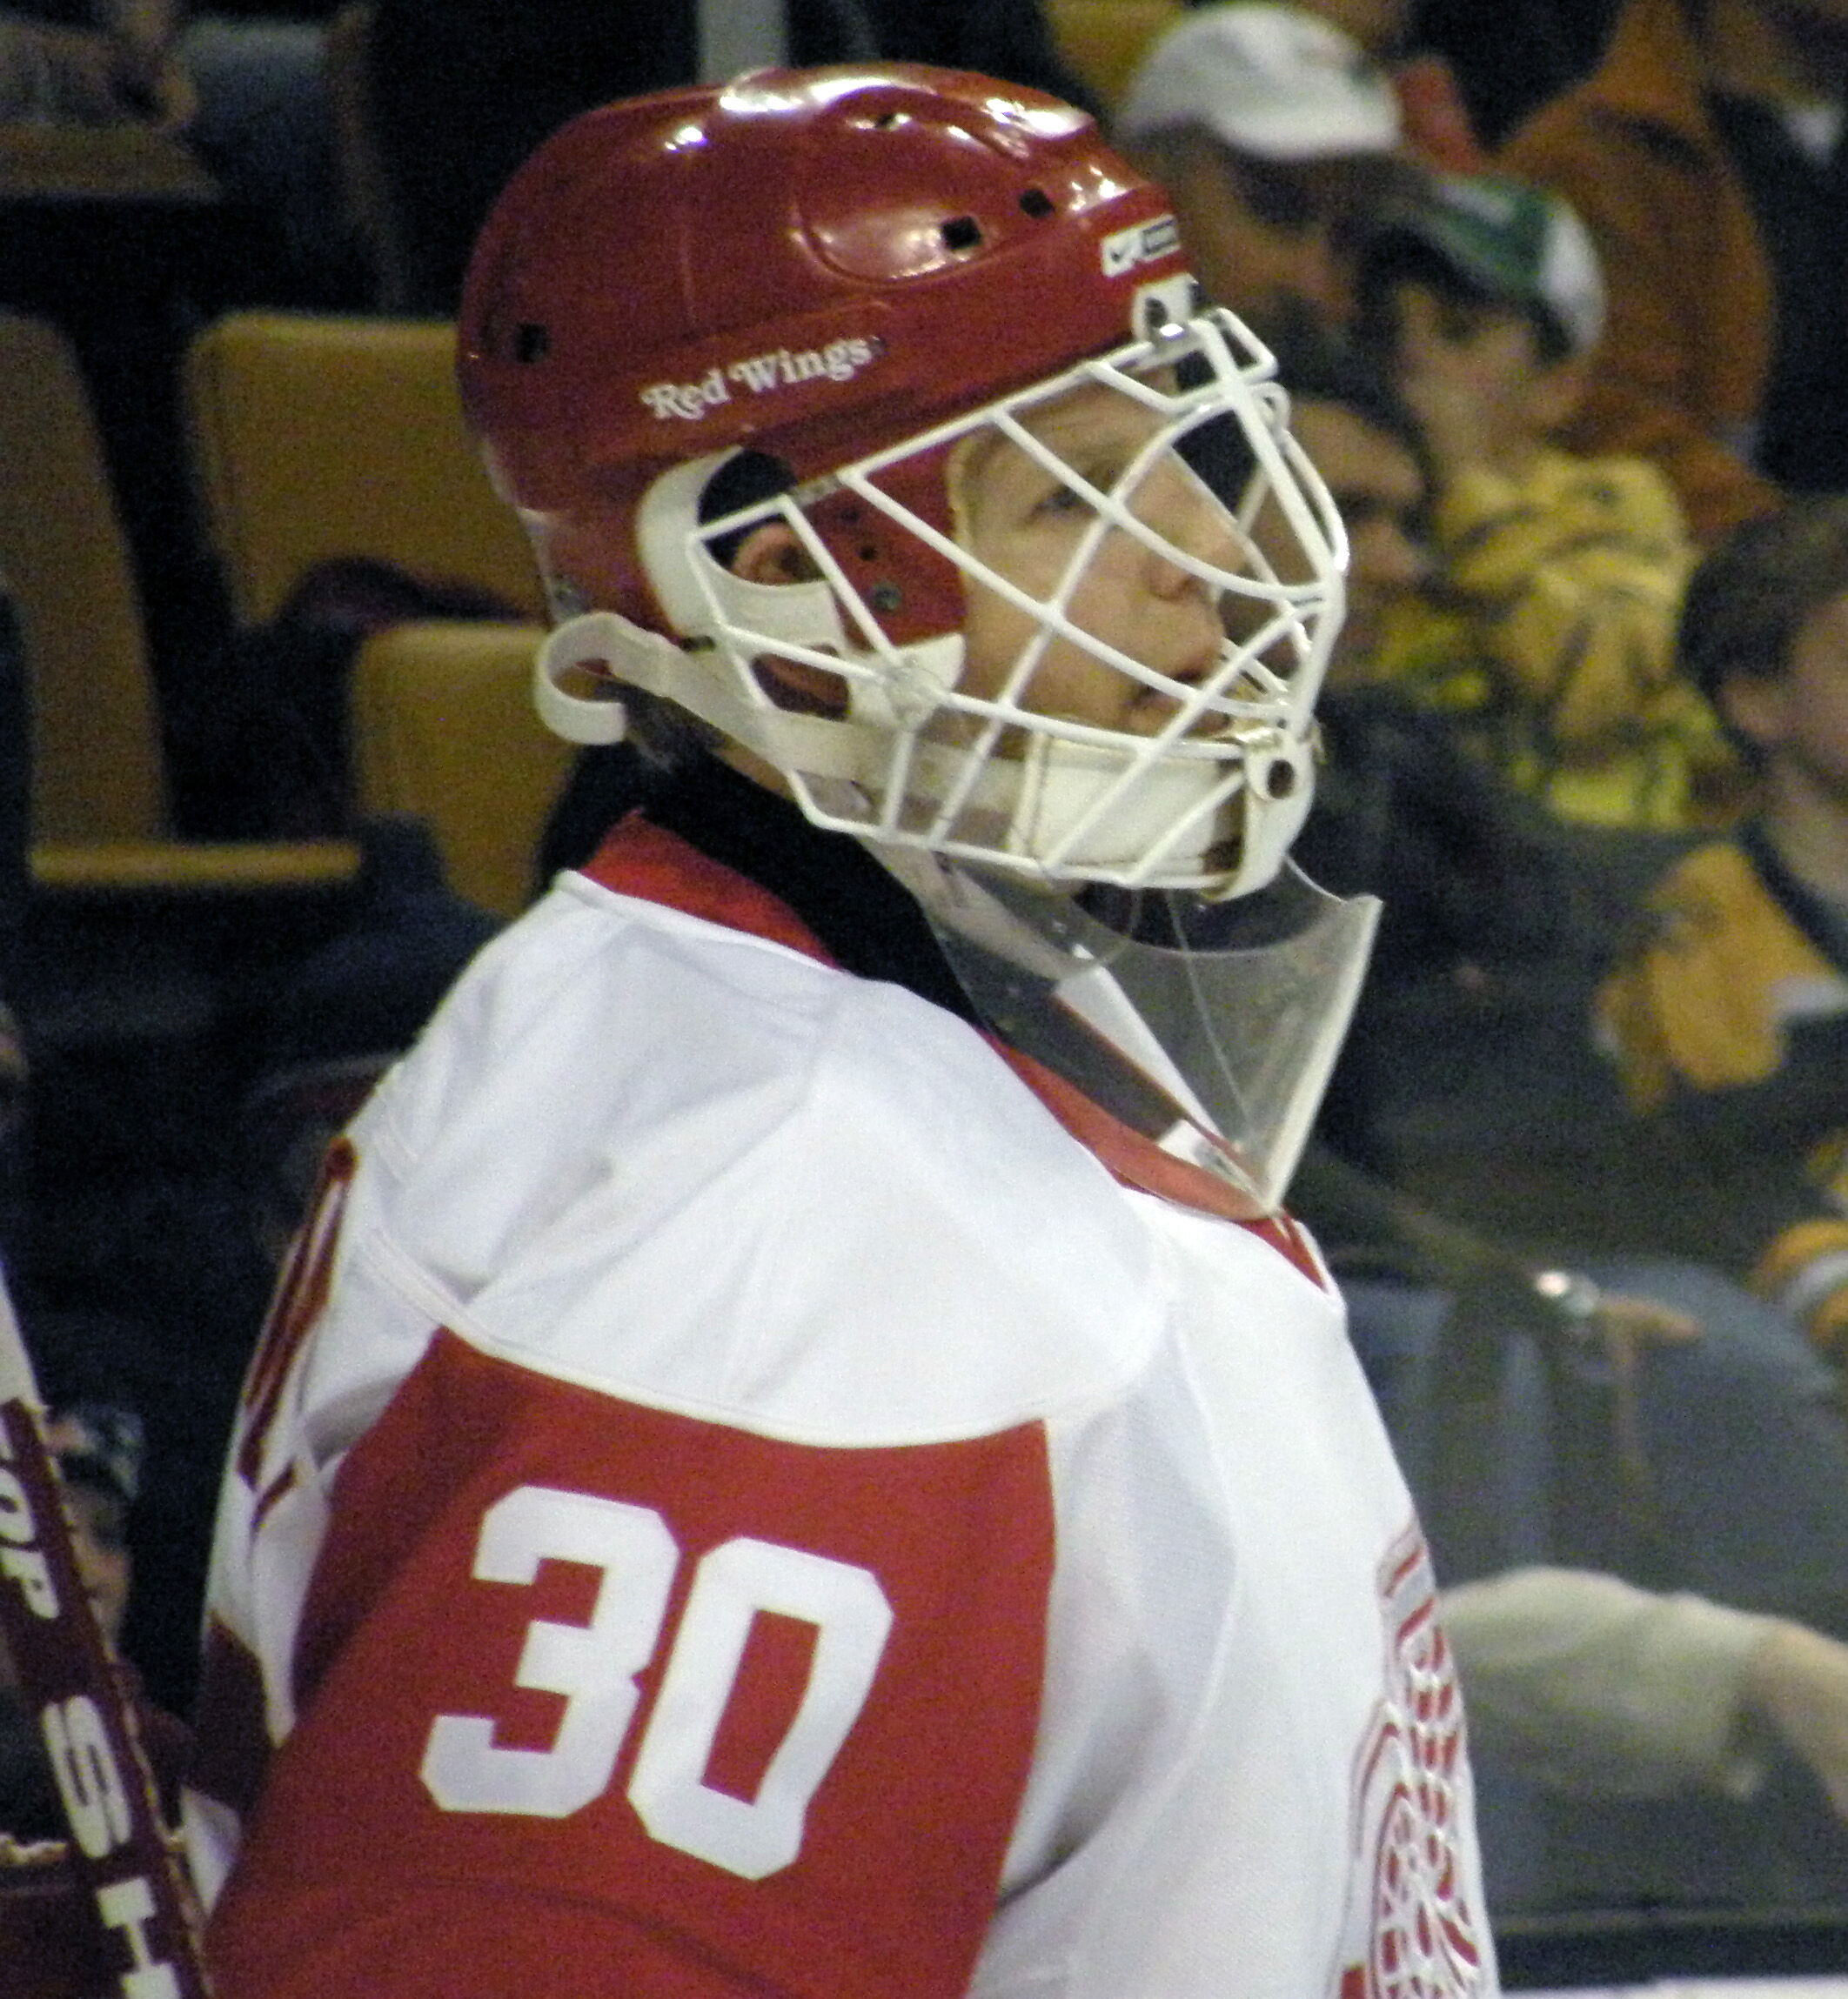 Osgood puts Wings two wins from Cup